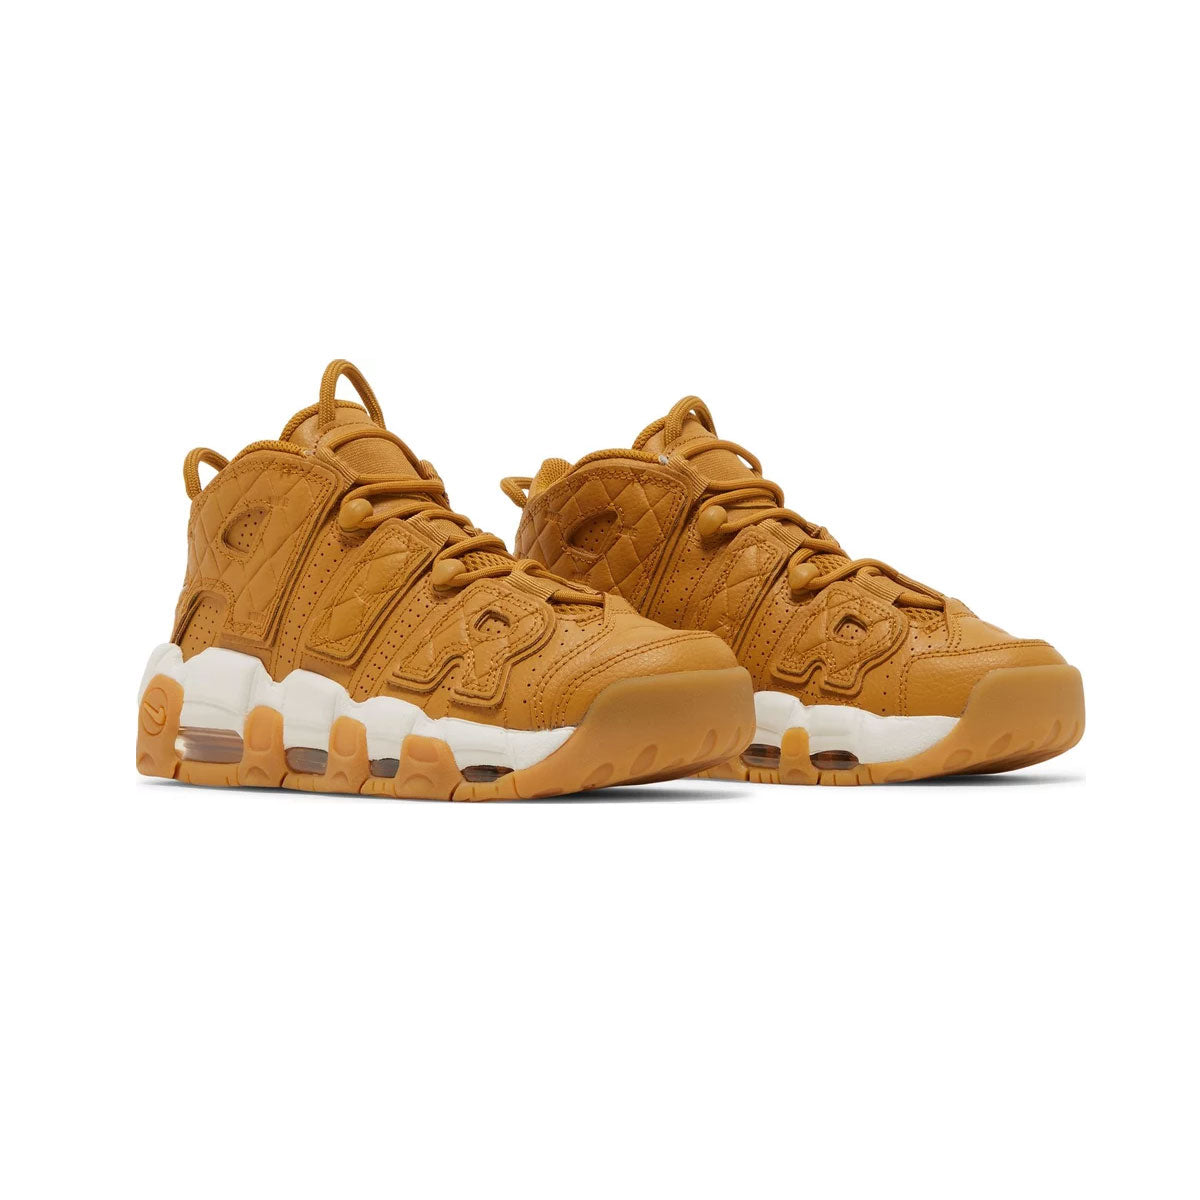 Nike Women's Air More Uptempo Quilted Wheat